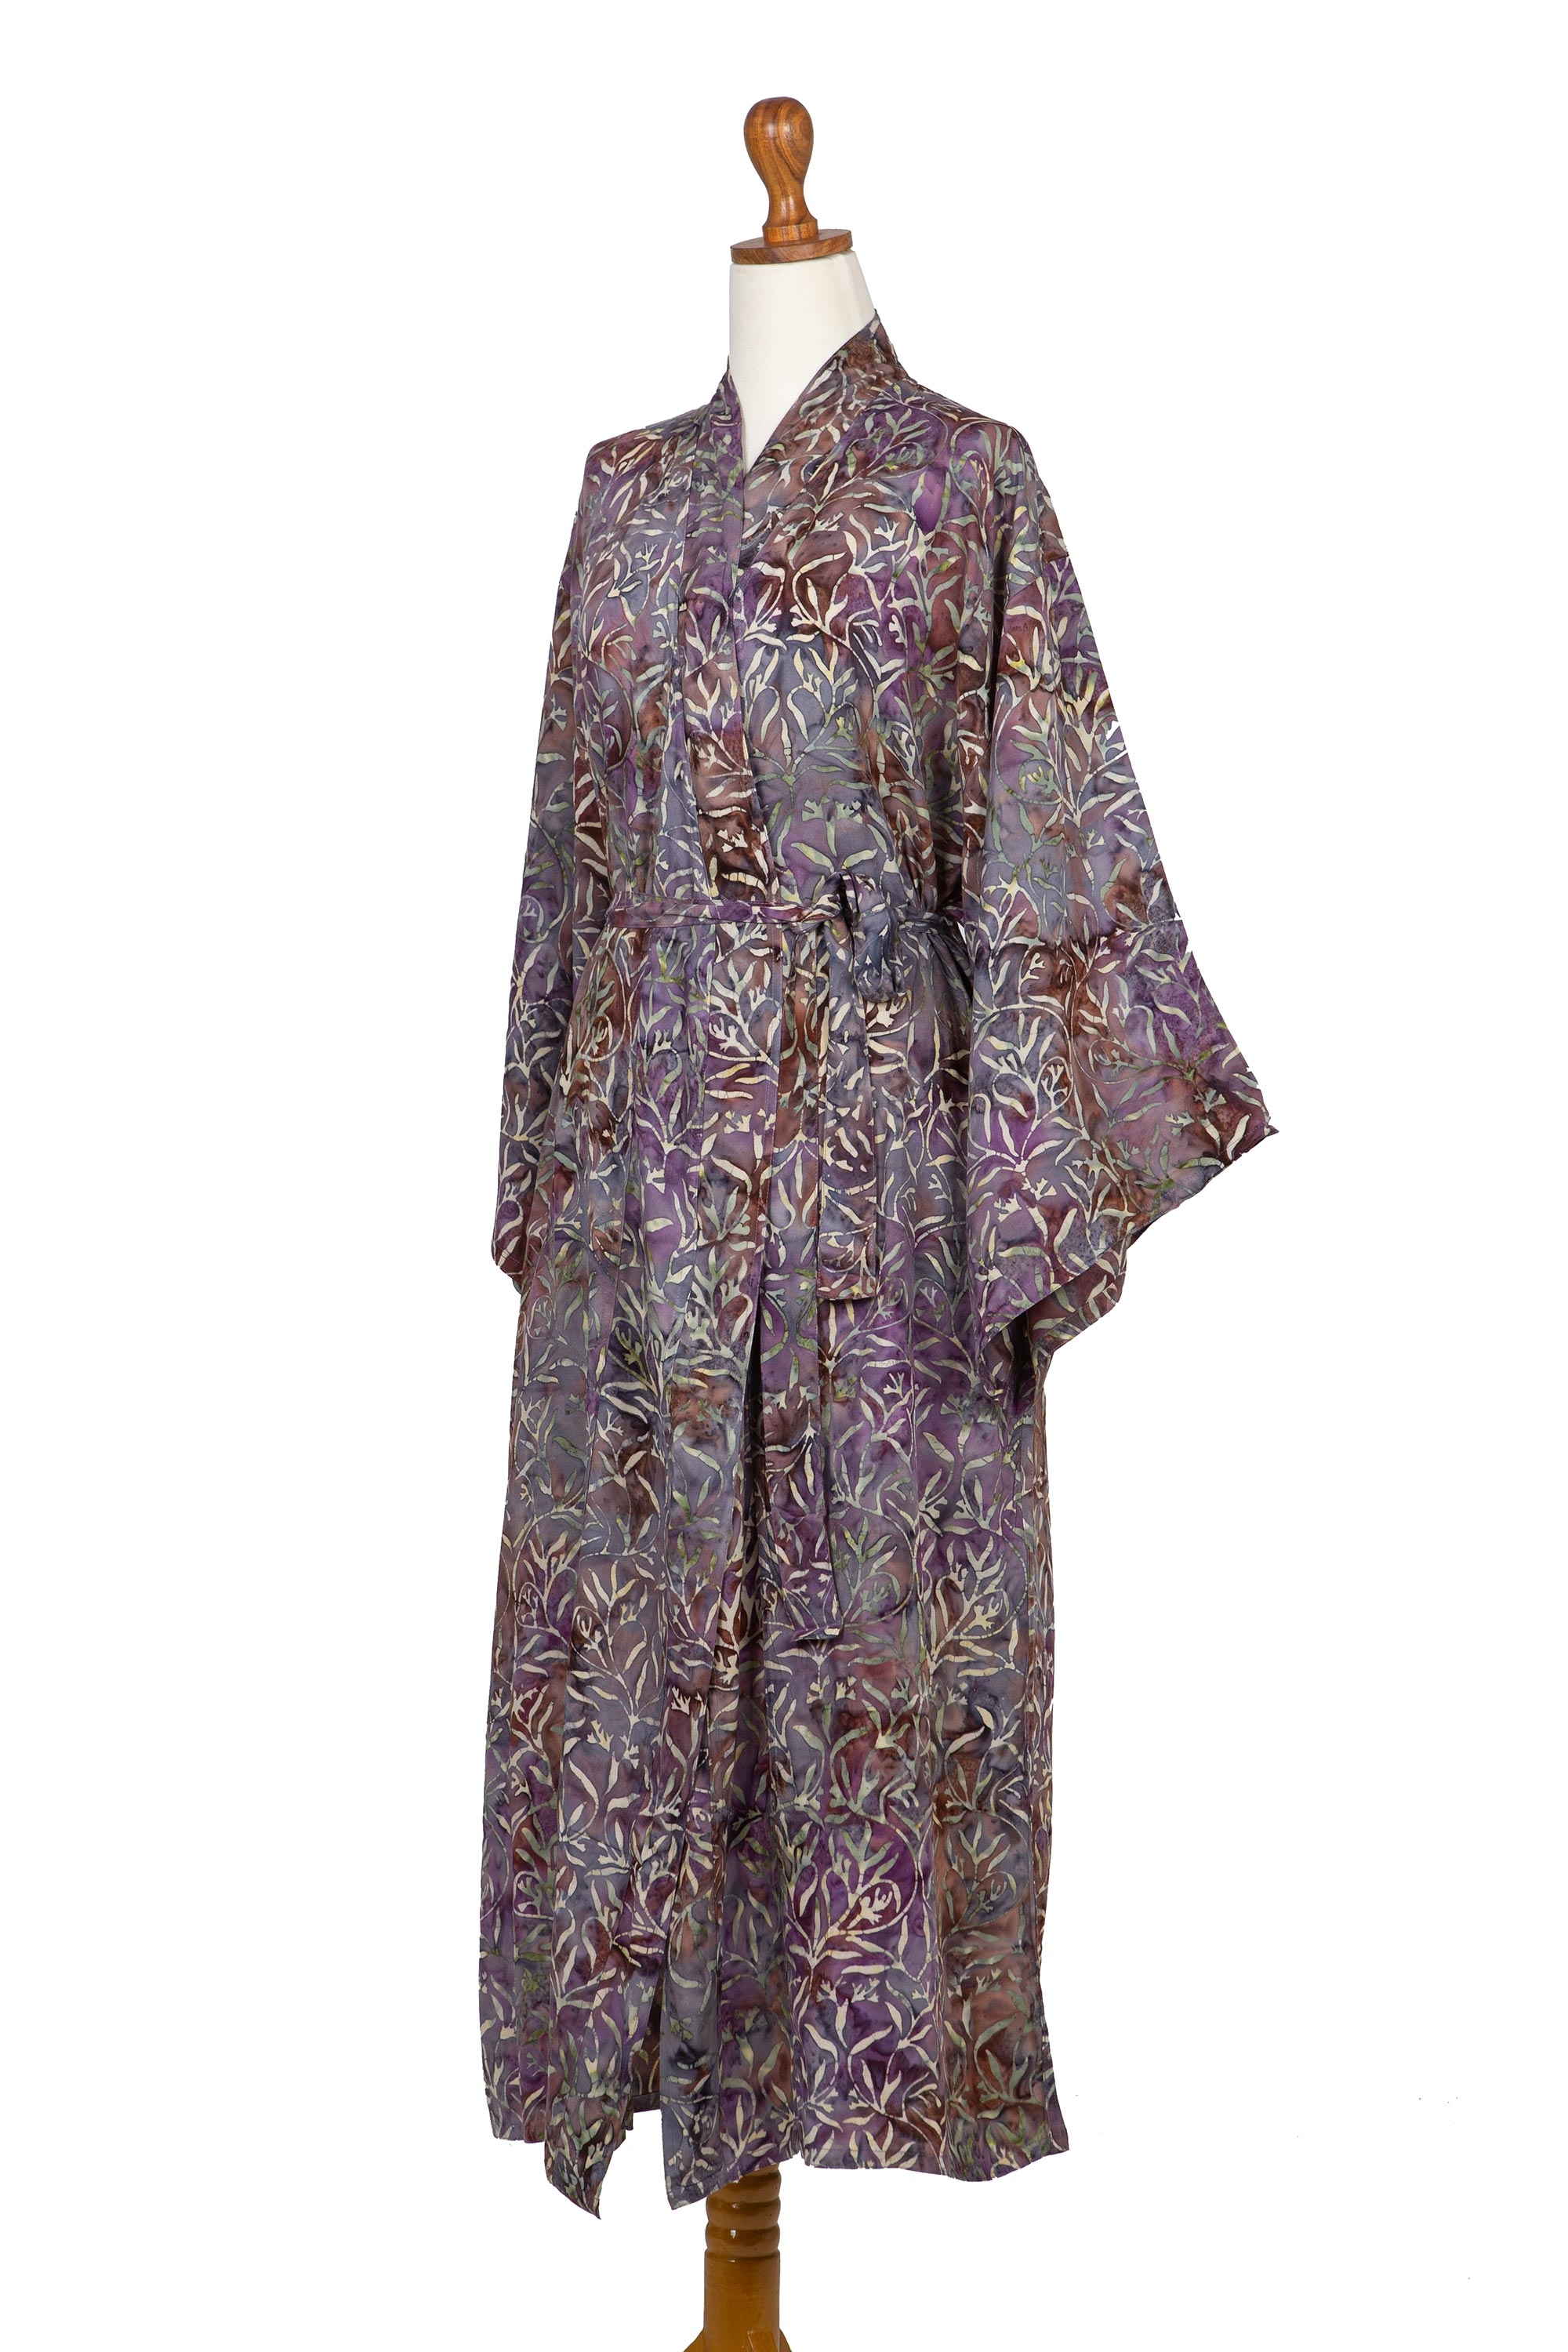 Sienna Purple Floral Batik on Rayon Long Robe from Indonesia - Floral ...